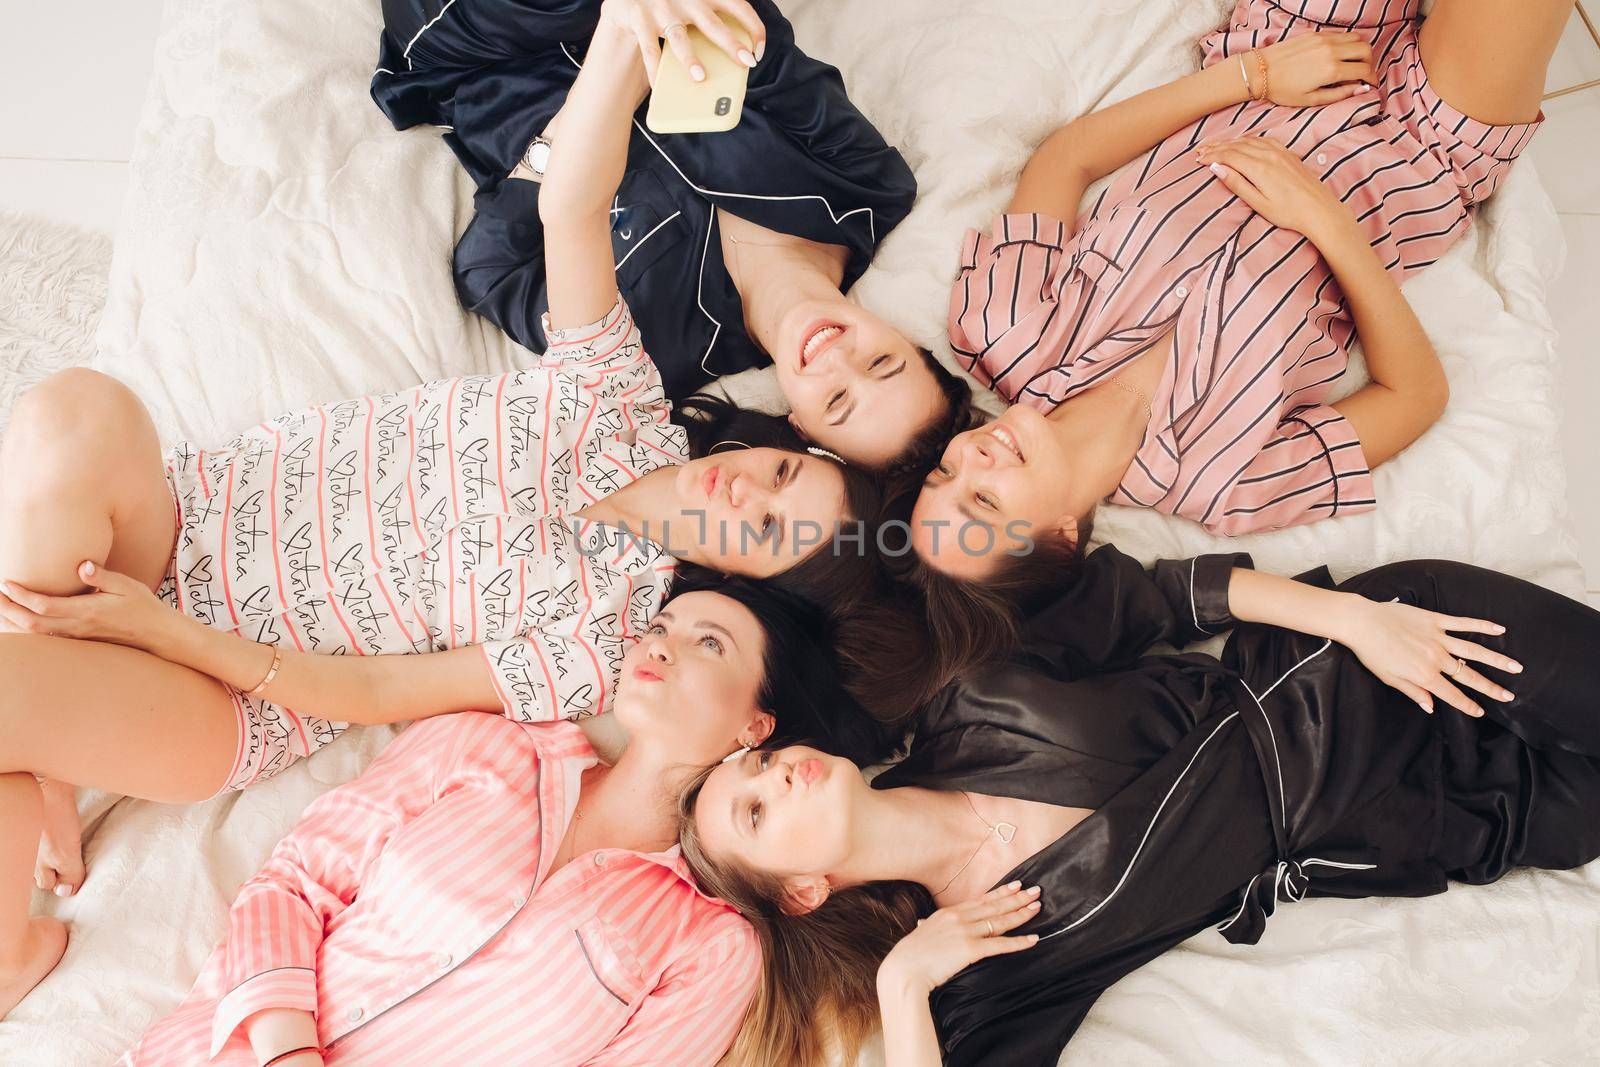 Top view stock photo of five beautiful girlfriends in lovely home apparel making selfie laying on cozy bed. Bride-to-be taking selfie with her mobile phone with her best friends or bridesmaids while resting on bed. They are making duck faces posing to camera.